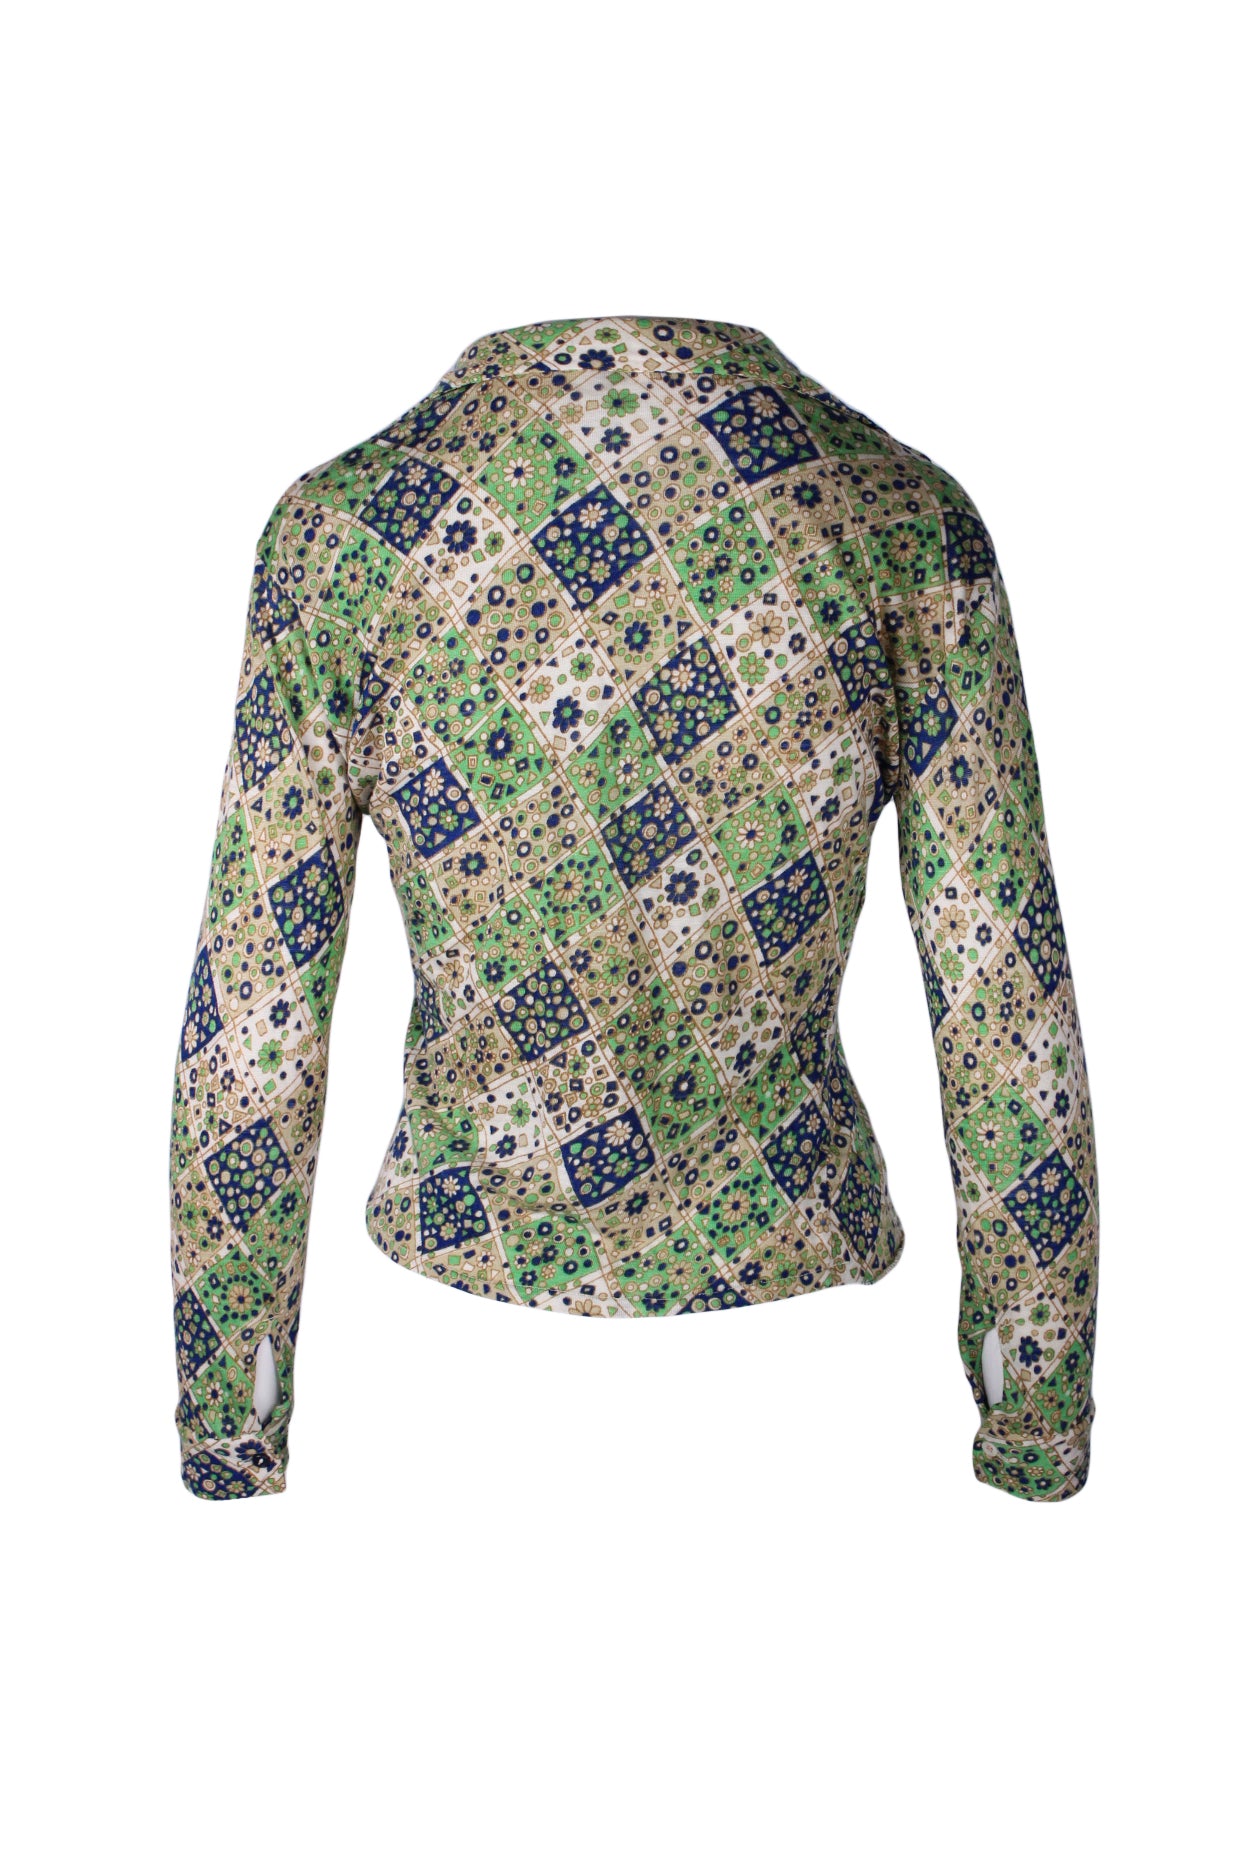 back angle of long sleeve diamond patterned vintage top. features buttoned cuffs. 